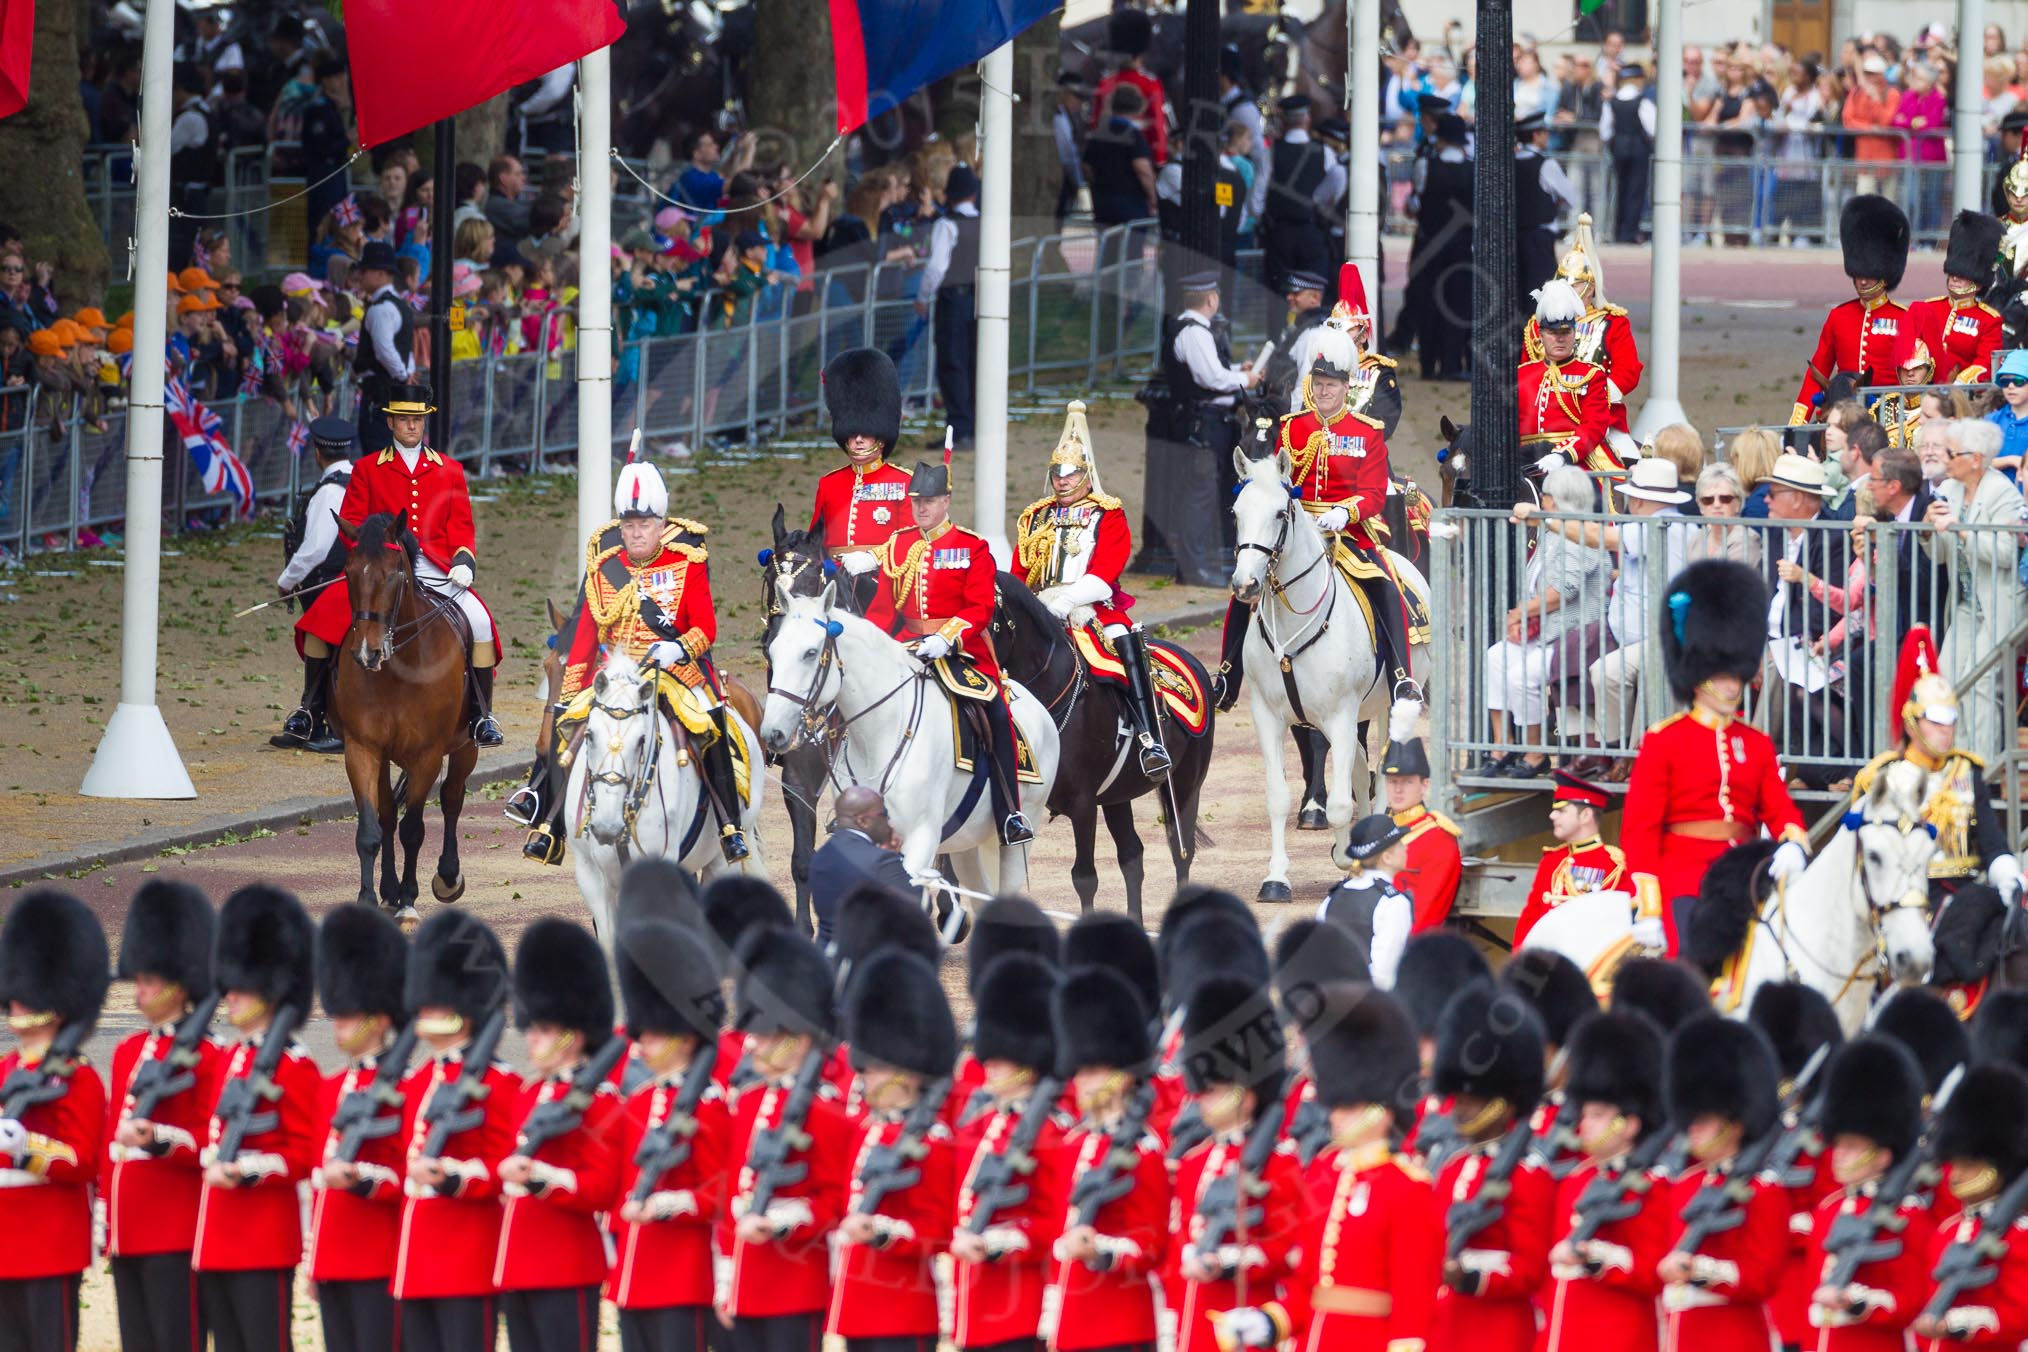 The Colonel's Review 2015.
Horse Guards Parade, Westminster,
London,

United Kingdom,
on 06 June 2015 at 10:58, image #177